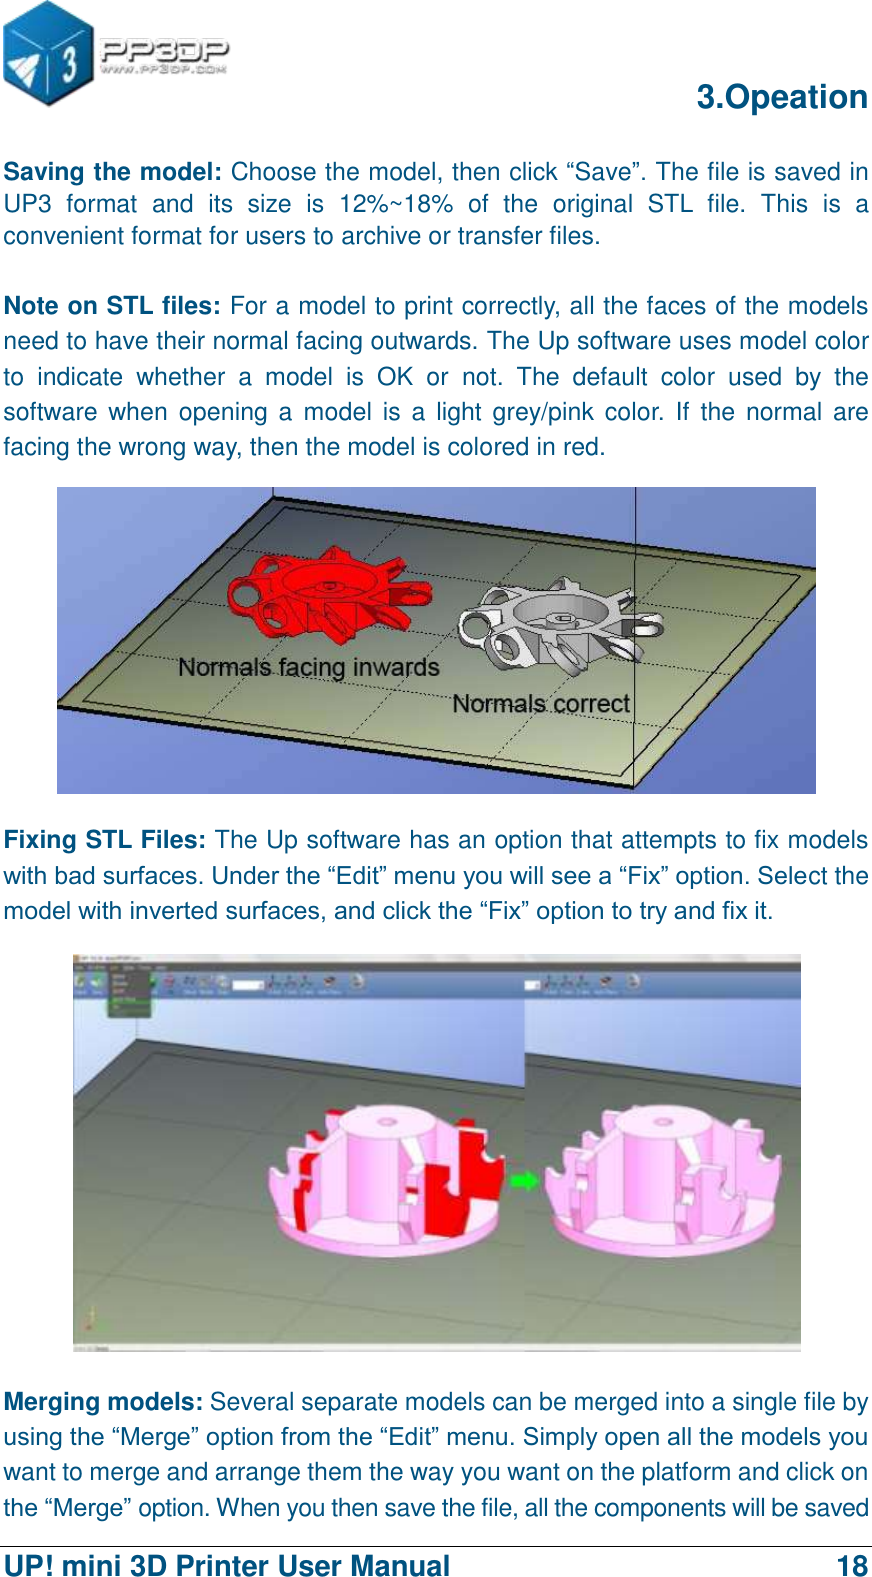      3.Opeation  UP! mini 3D Printer User Manual                                18 Saving the model: Choose the model, then click “Save”. The file is saved in UP3  format  and  its  size  is  12%~18%  of  the  original  STL  file.  This  is  a convenient format for users to archive or transfer files.  Note on STL files: For a model to print correctly, all the faces of the models need to have their normal facing outwards. The Up software uses model color to  indicate  whether  a  model  is  OK  or  not.  The  default  color  used  by  the software when  opening a  model is a light grey/pink  color. If the  normal are facing the wrong way, then the model is colored in red.  Fixing STL Files: The Up software has an option that attempts to fix models with bad surfaces. Under the “Edit” menu you will see a “Fix” option. Select the model with inverted surfaces, and click the “Fix” option to try and fix it.  Merging models: Several separate models can be merged into a single file by using the “Merge” option from the “Edit” menu. Simply open all the models you want to merge and arrange them the way you want on the platform and click on the “Merge” option. When you then save the file, all the components will be saved 